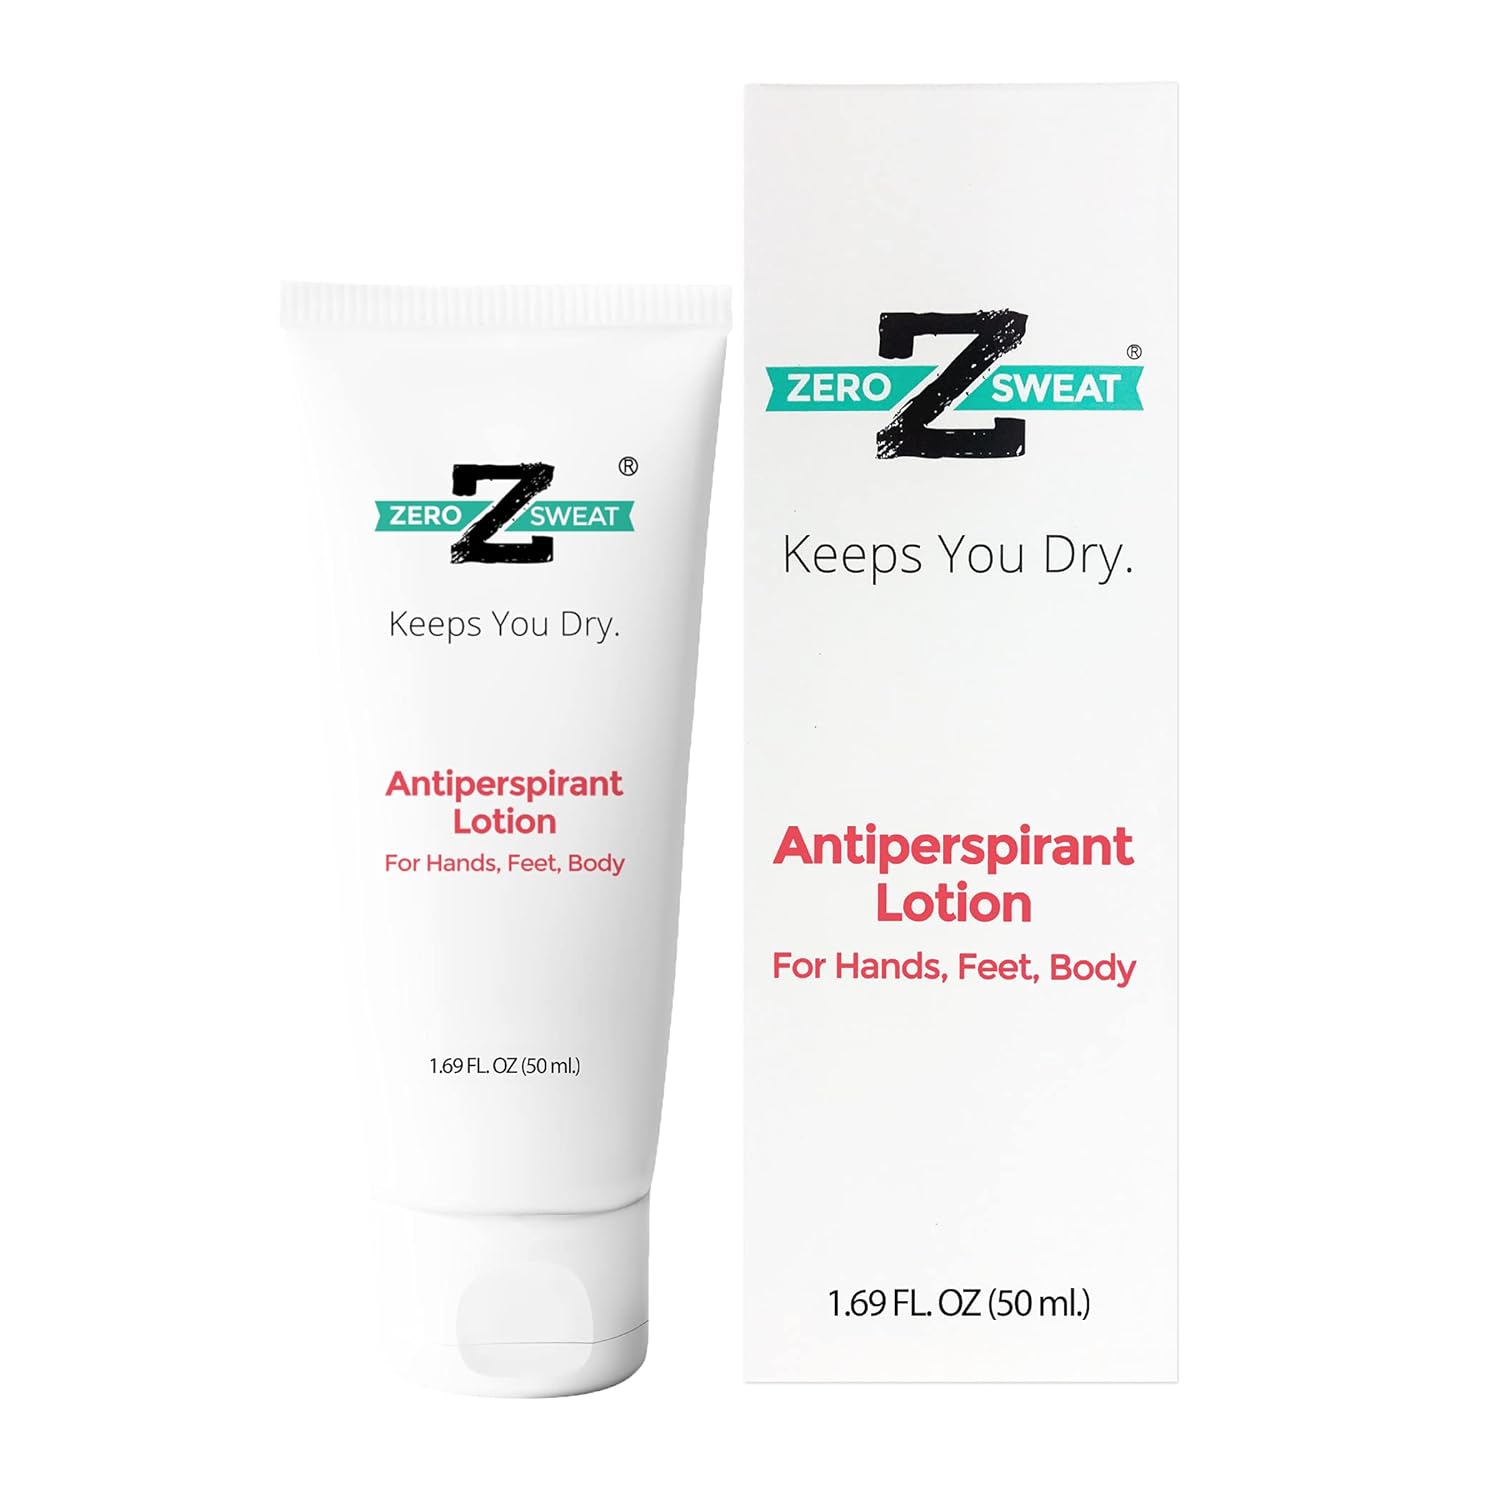 Antiperspirant 20% Deodorant Lotion | Clinical Strength Hyperhidrosis Treatment - Reduces Face and Body Sweating